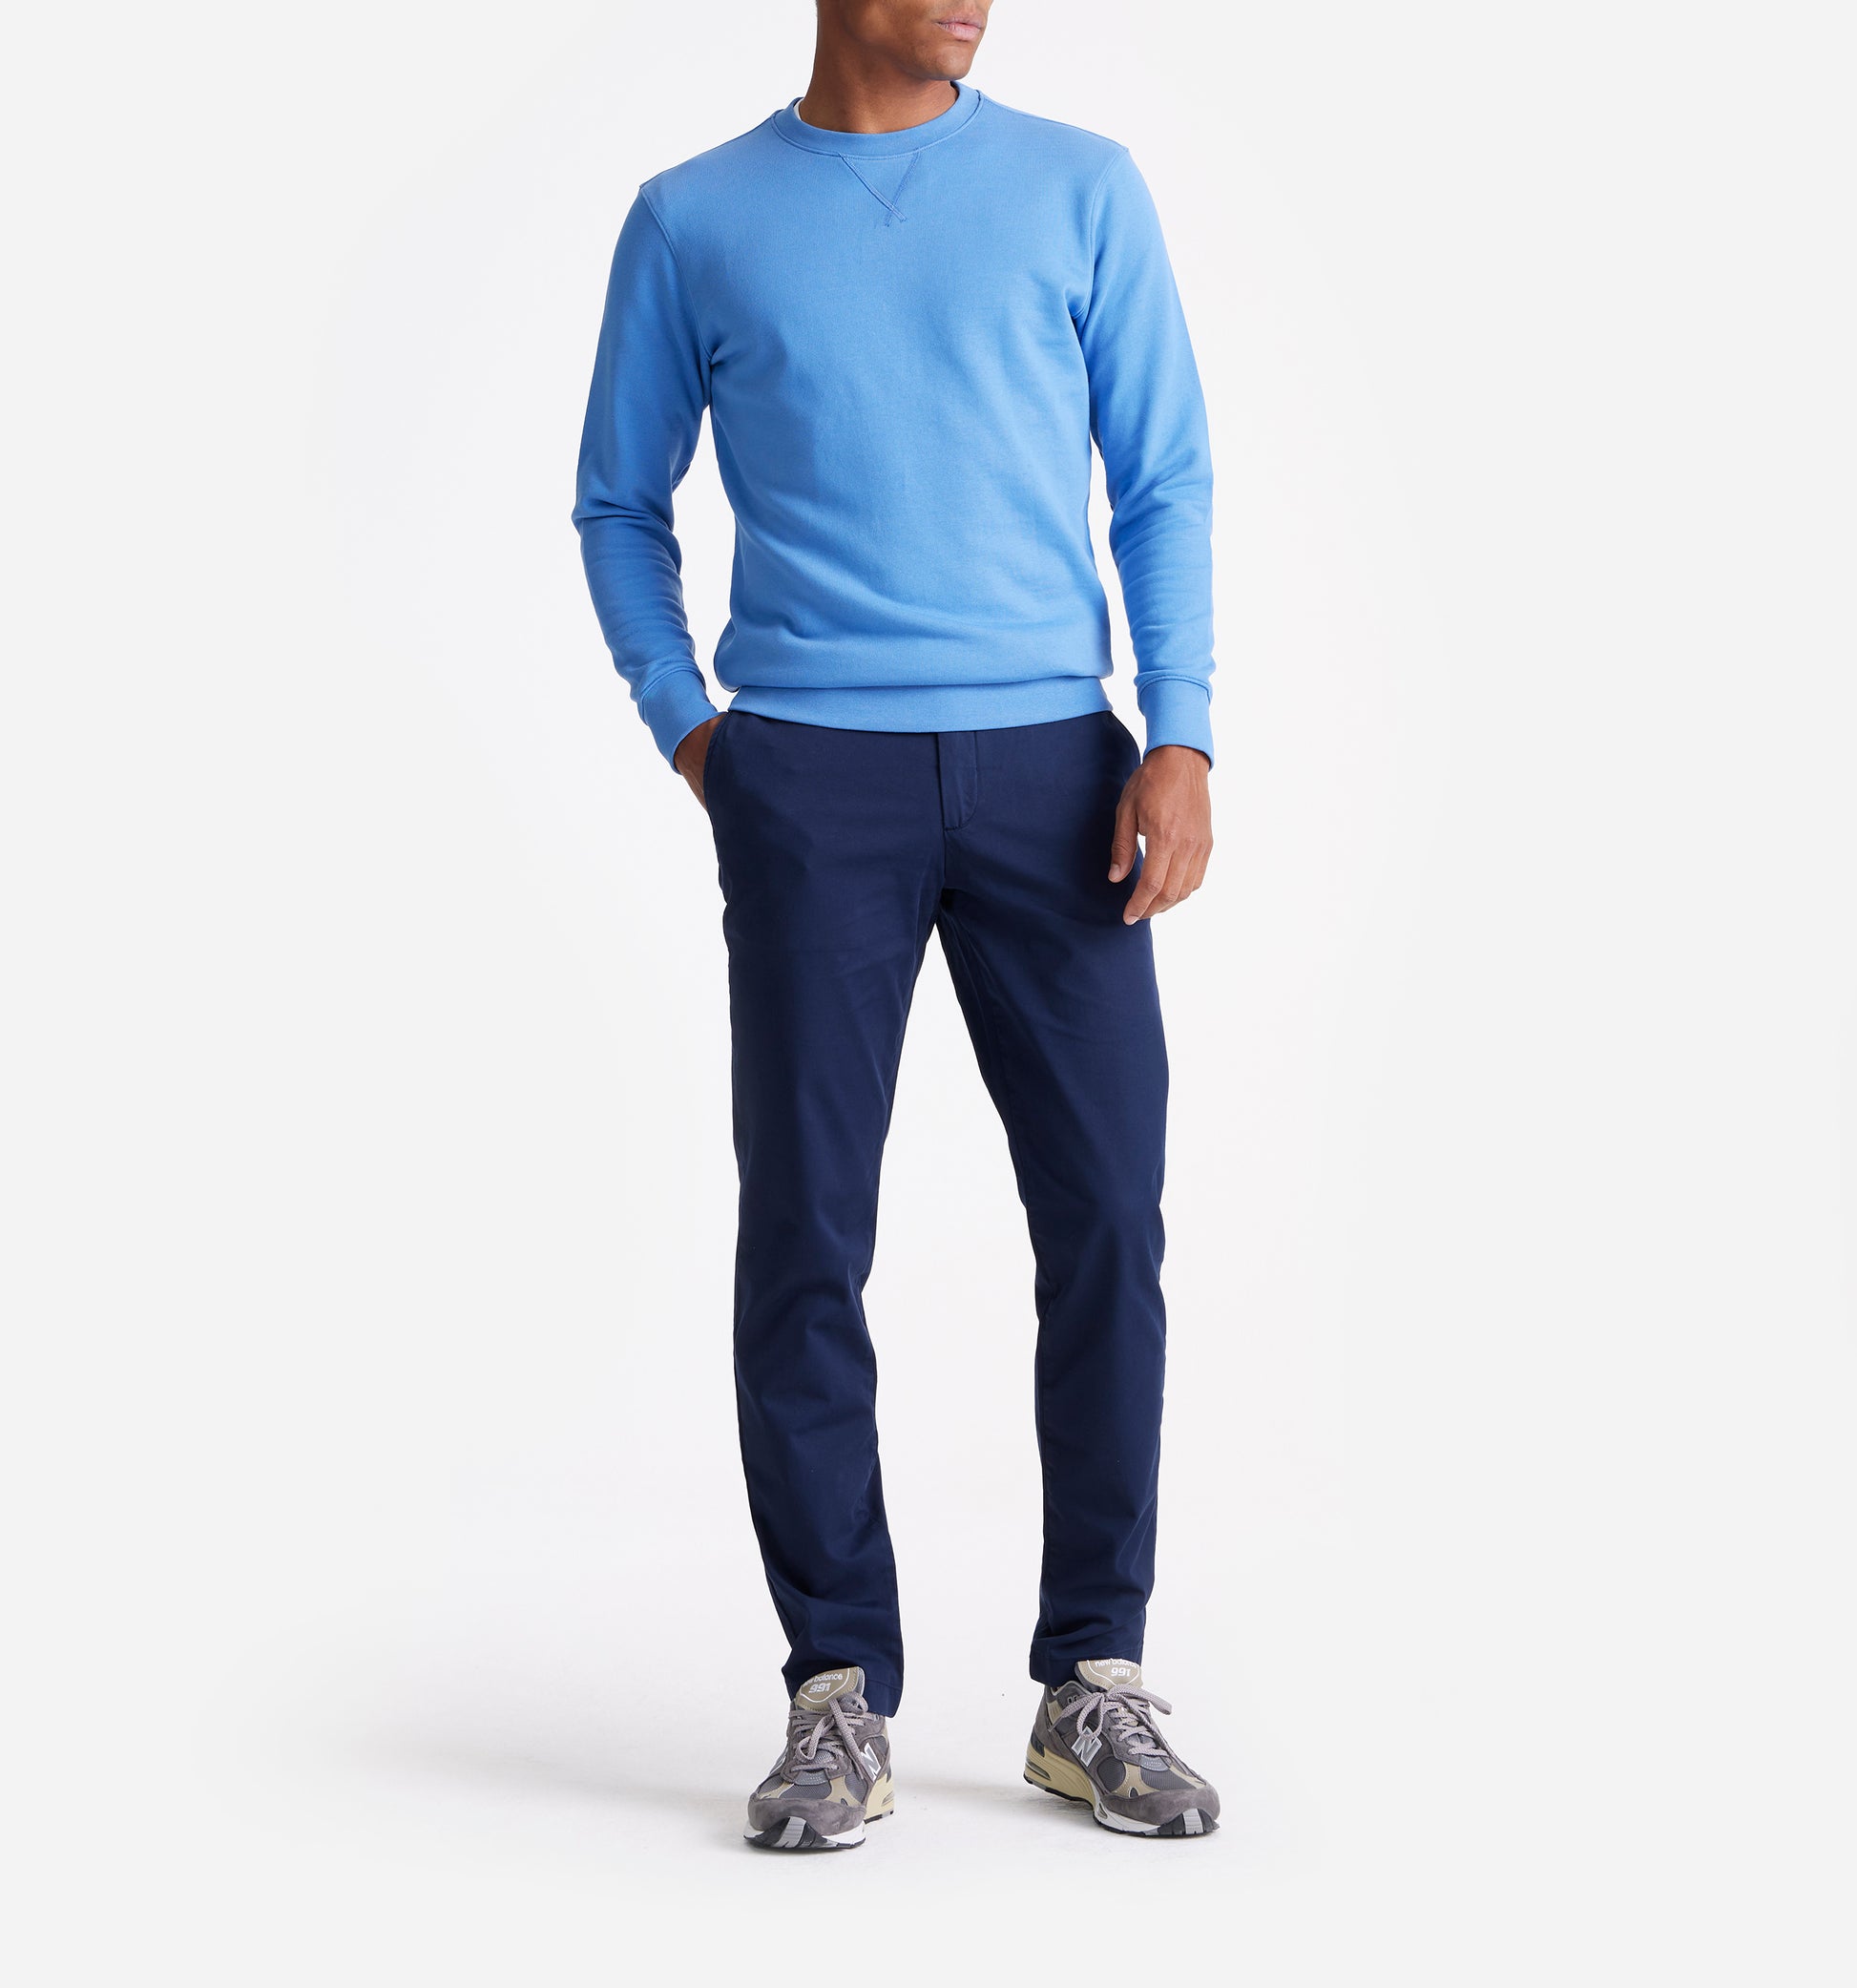 The George - French Terry Cotton Sweatshirt  In Blue From King Essentials